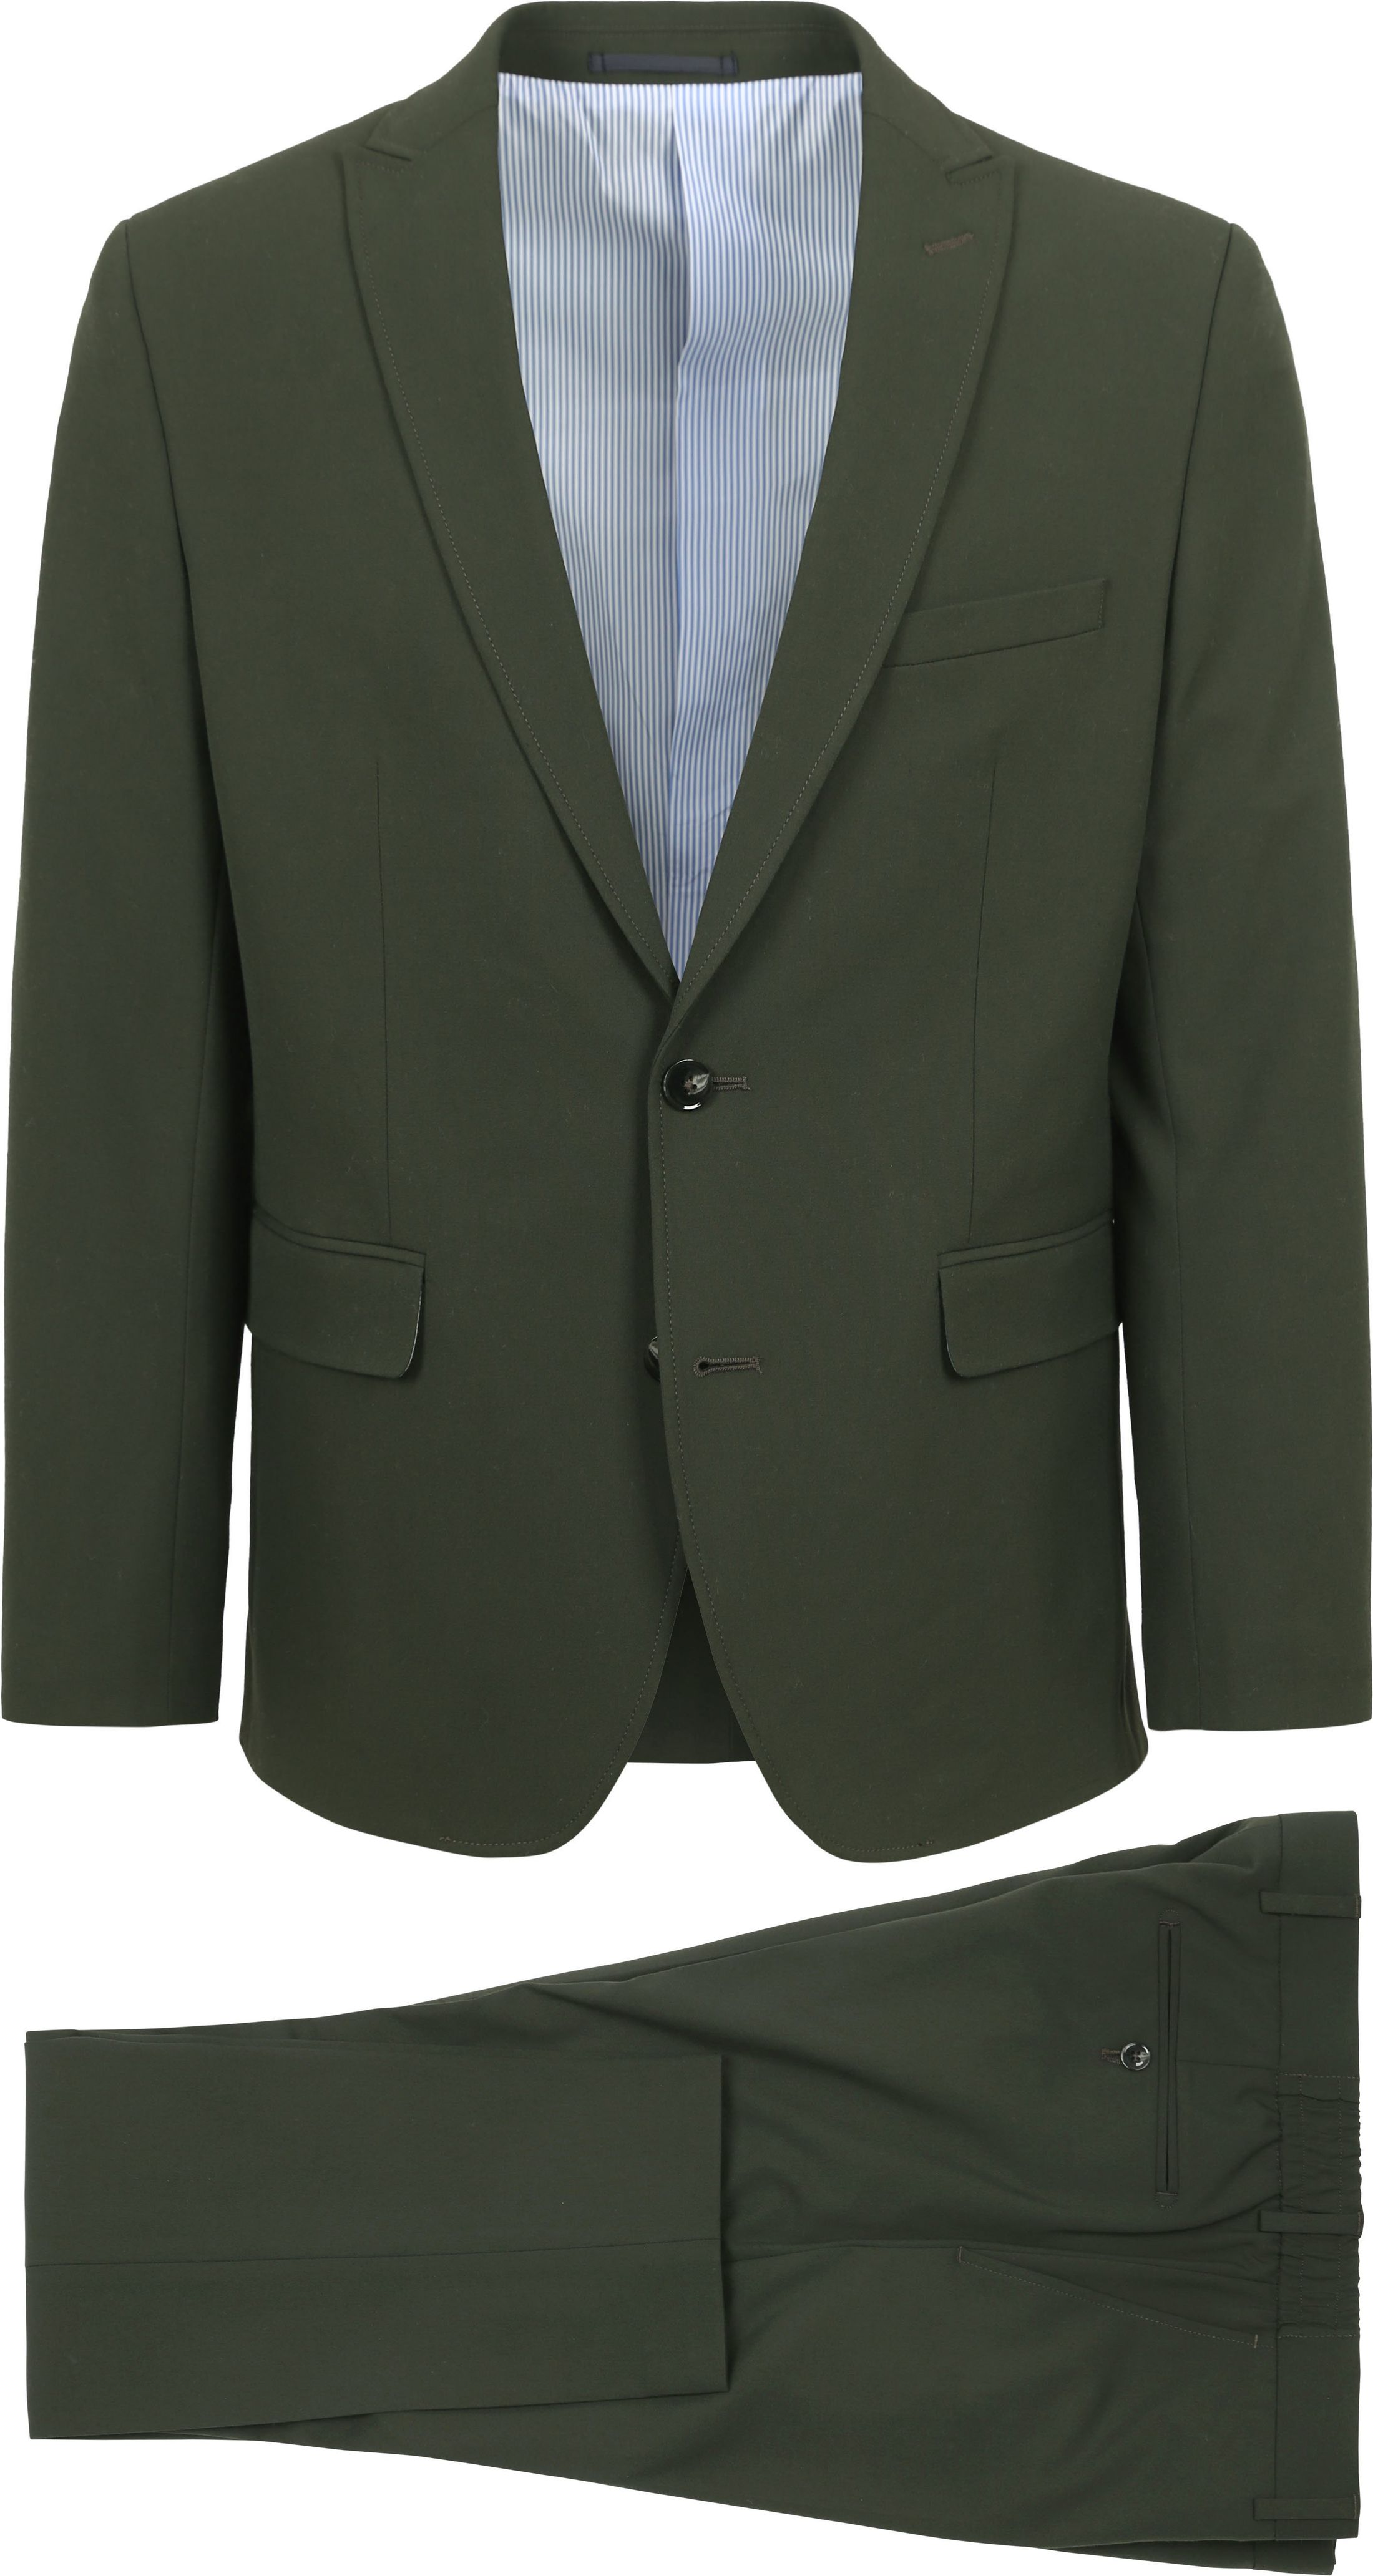 Suitable Sneaker Suit Olive Dark Green Green size 46-R product